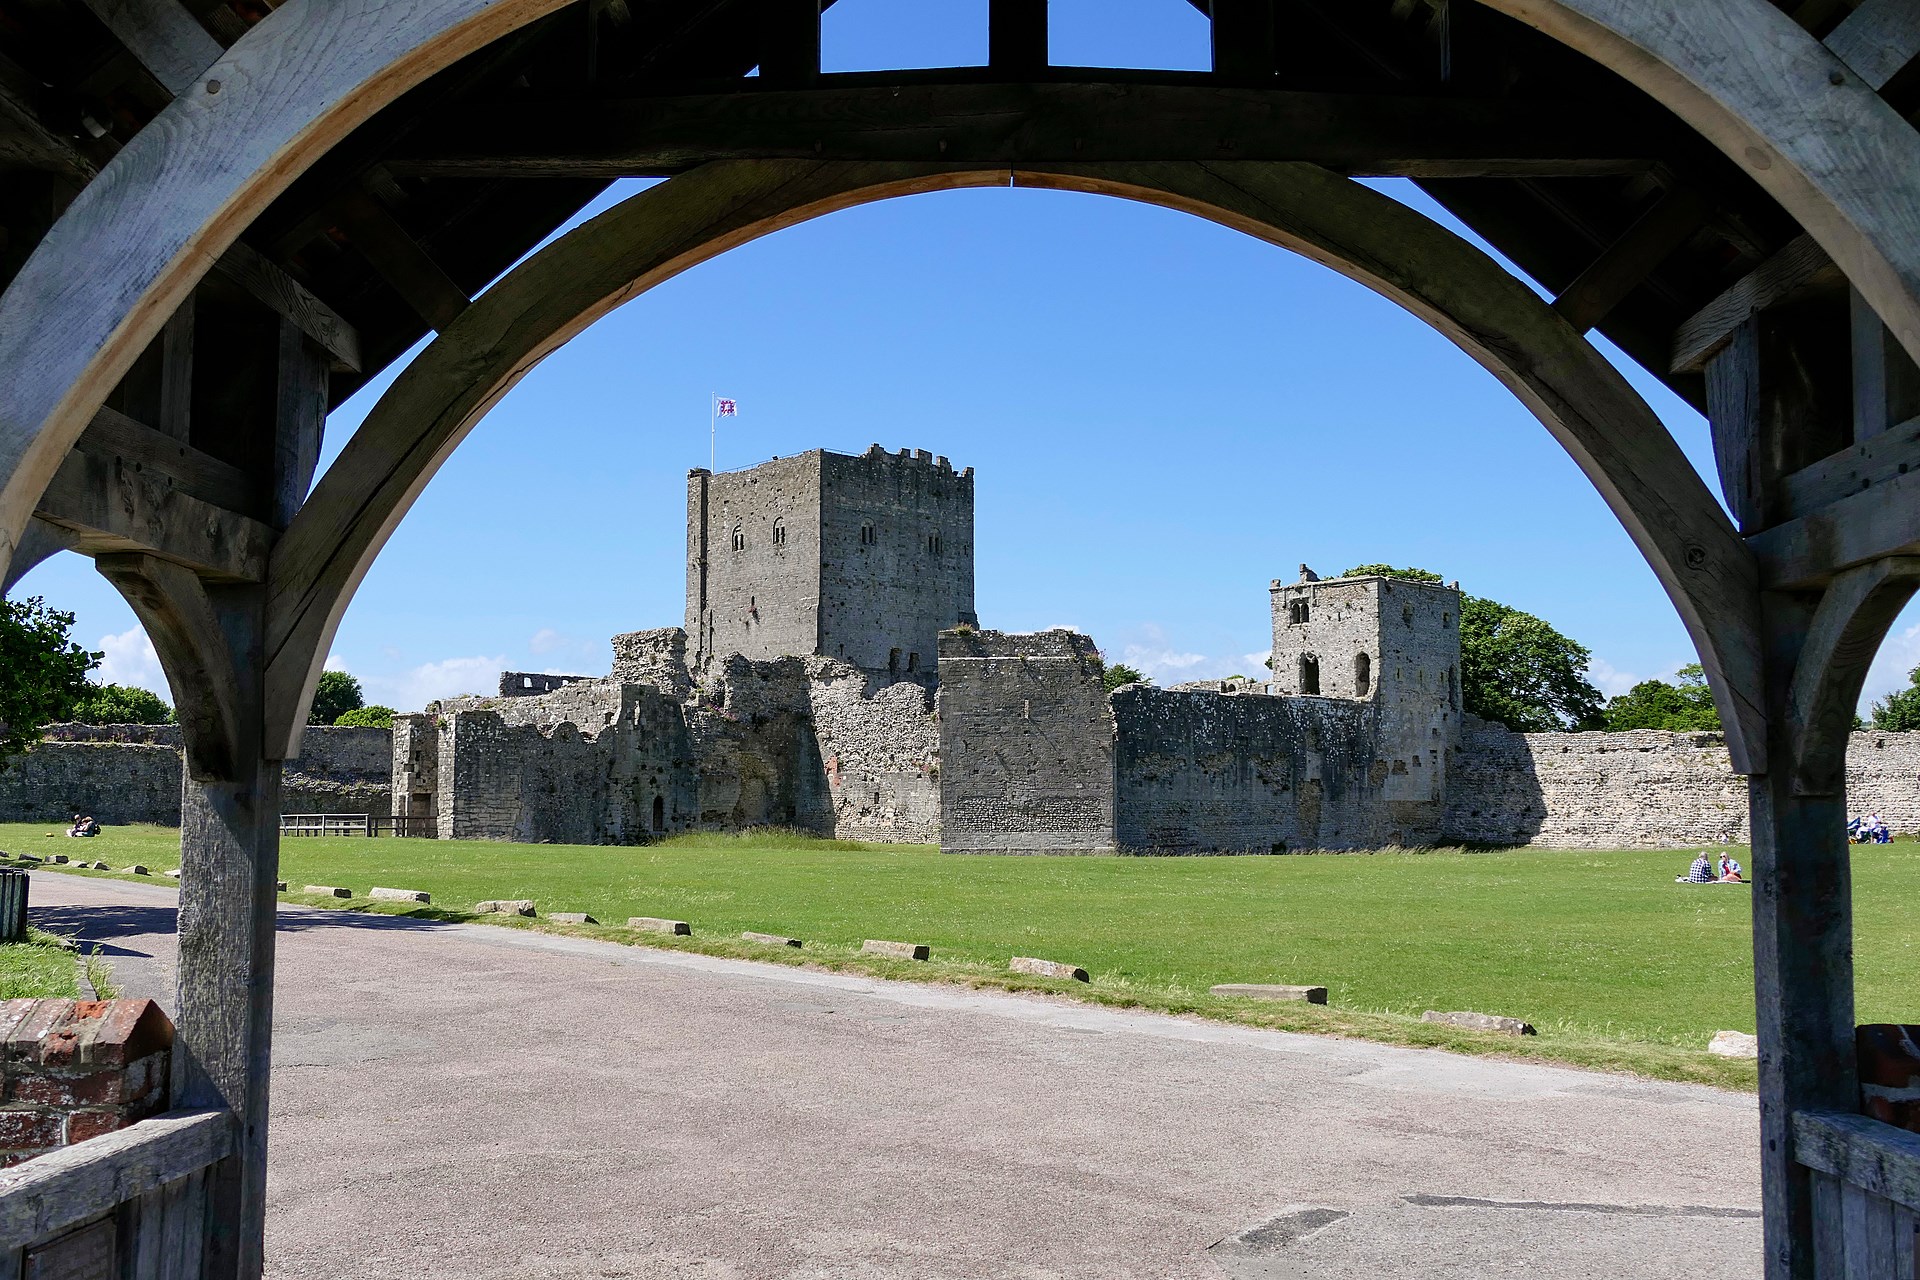 Image: View of Portchester Castle through the lychgate of St Mary's Church